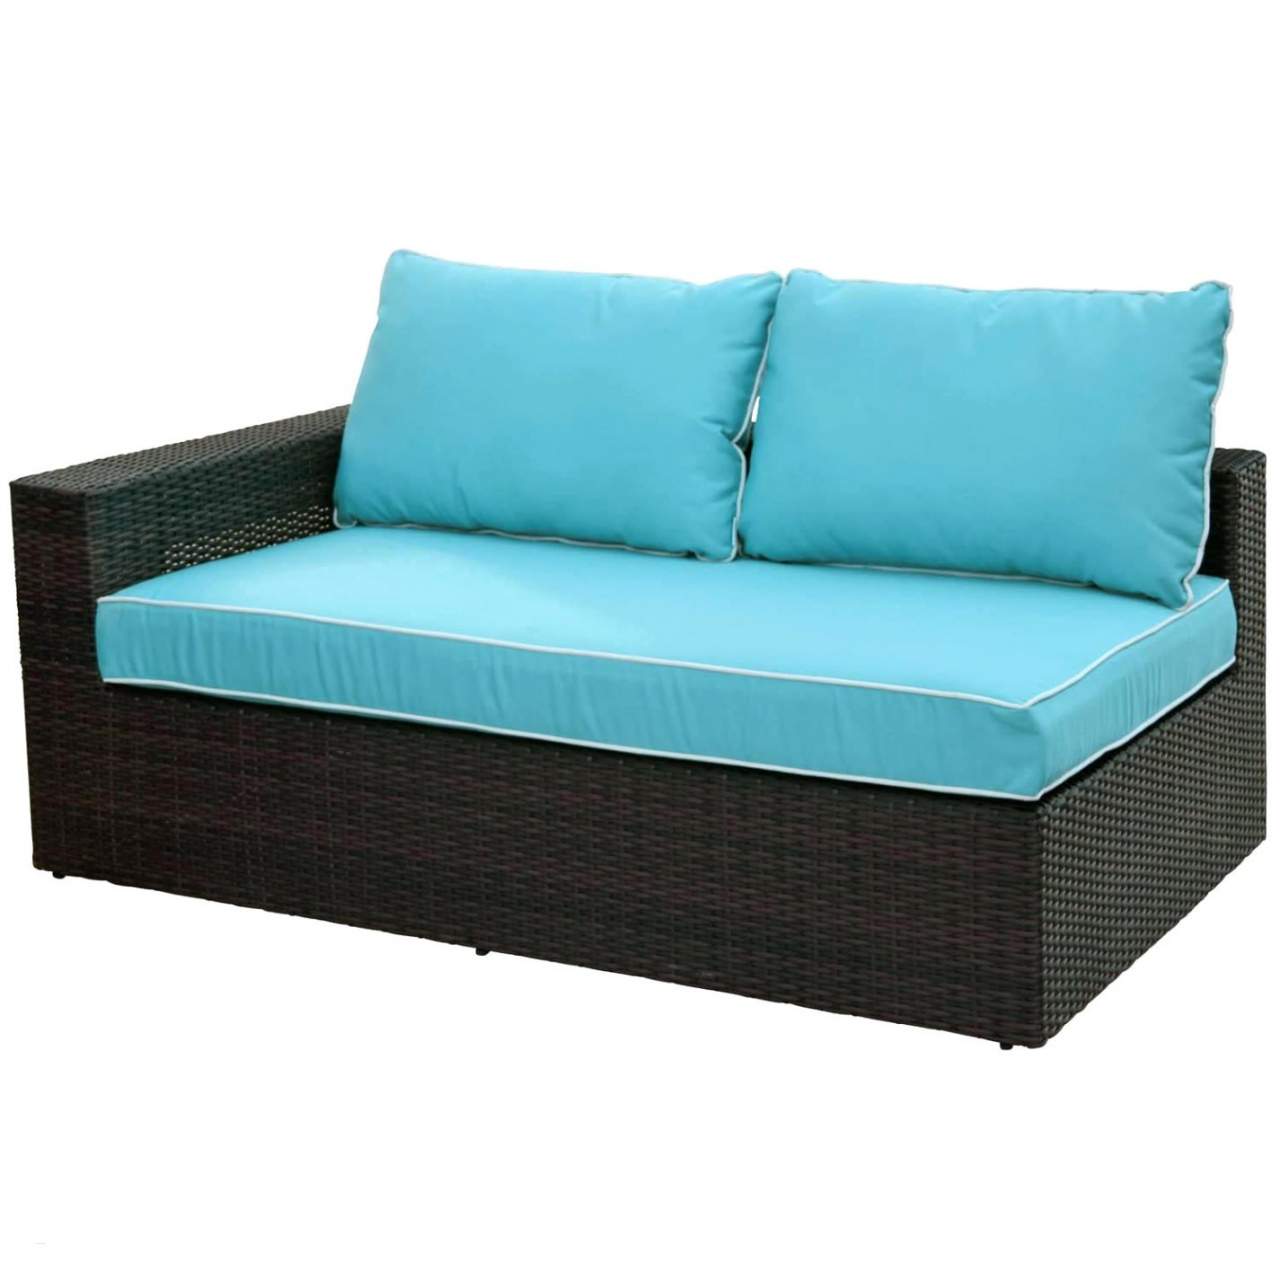 outdoor daybed daybed that looks like a sofa good outdoor daybed cushion luxury durch outdoor daybed